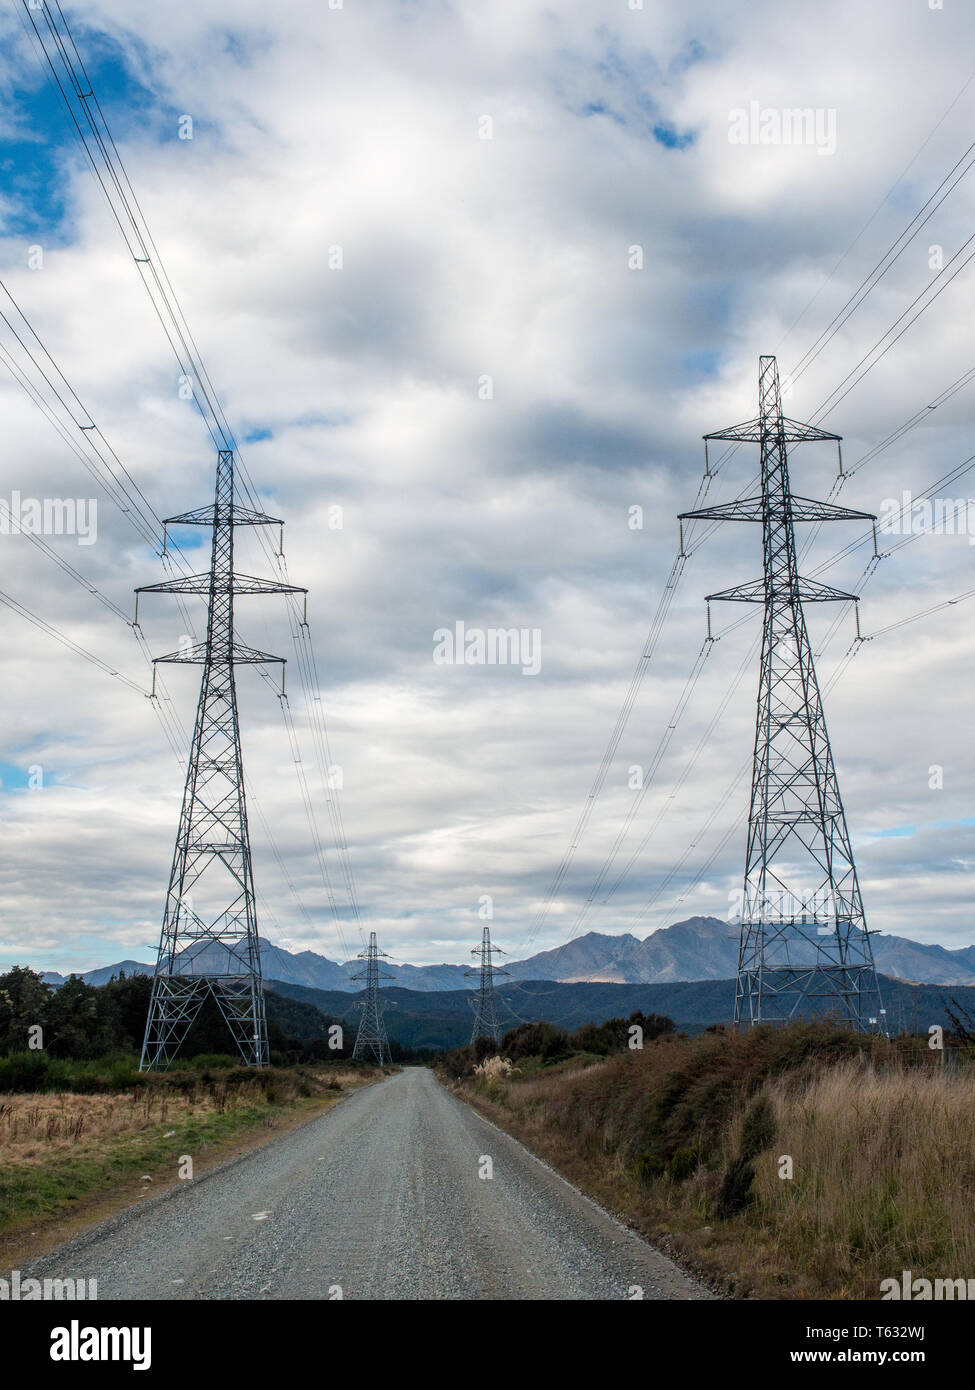 Electricity transmission pylons from Lake Manapouri hydroelectric power scheme, Borland Road, Fiordland National Park, Southland, New Zealand Stock Photo